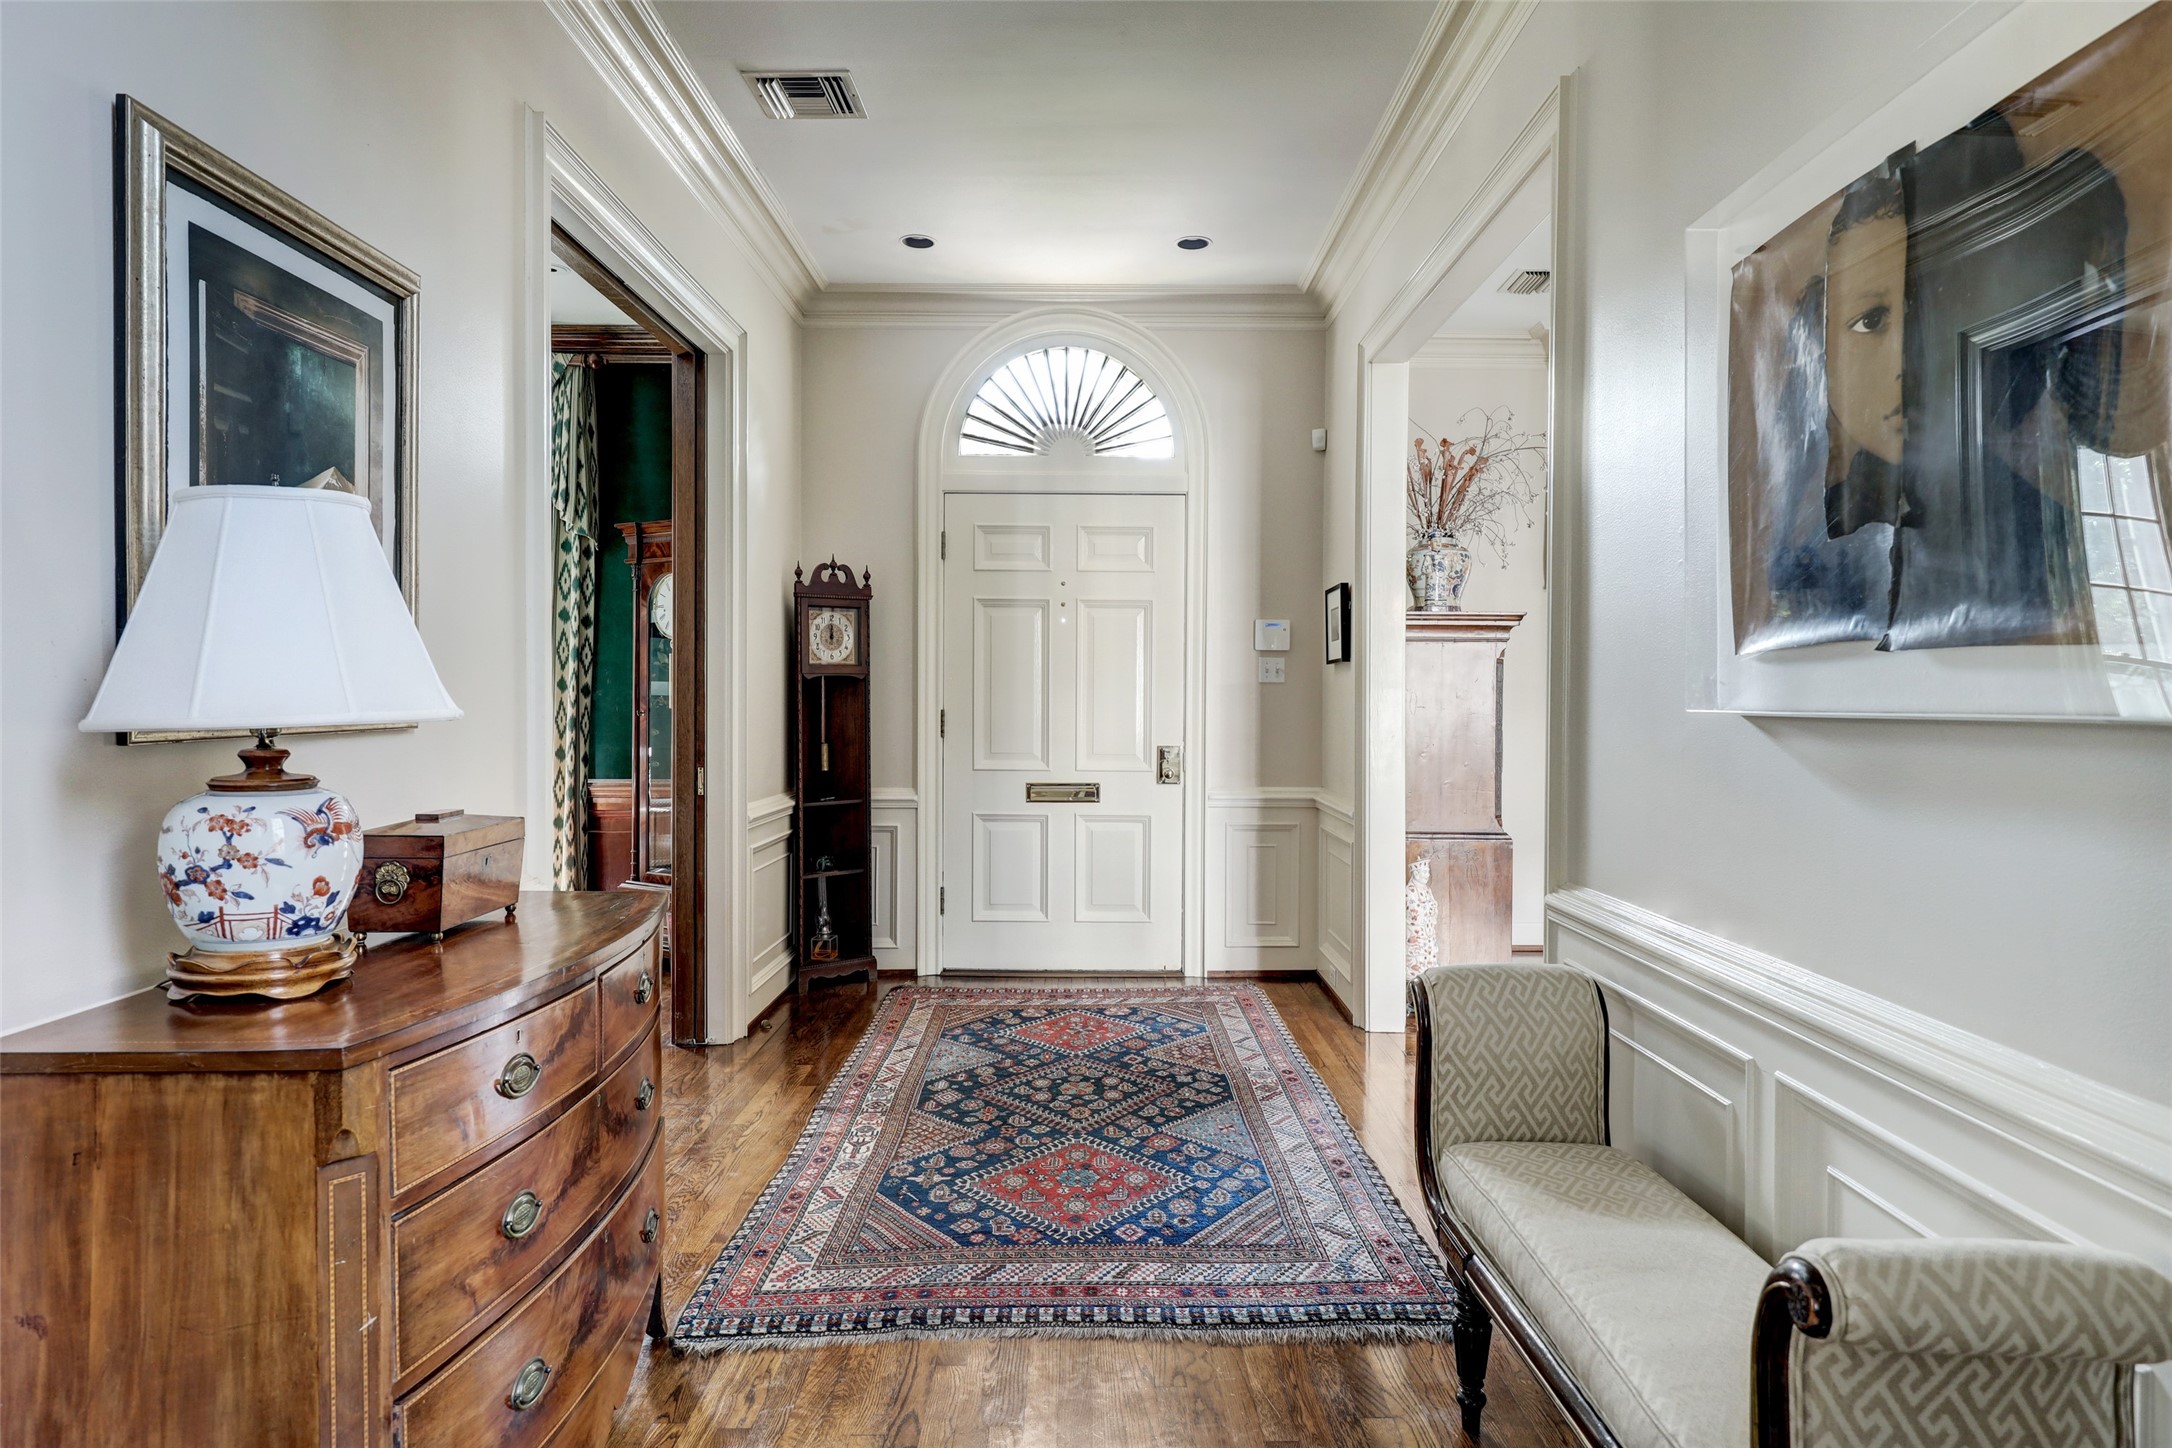 The stately entryway of this exquisite home welcomes you with gleaming hardwood floors that gently usher you to the formal living, library/home office, and formal dining room.